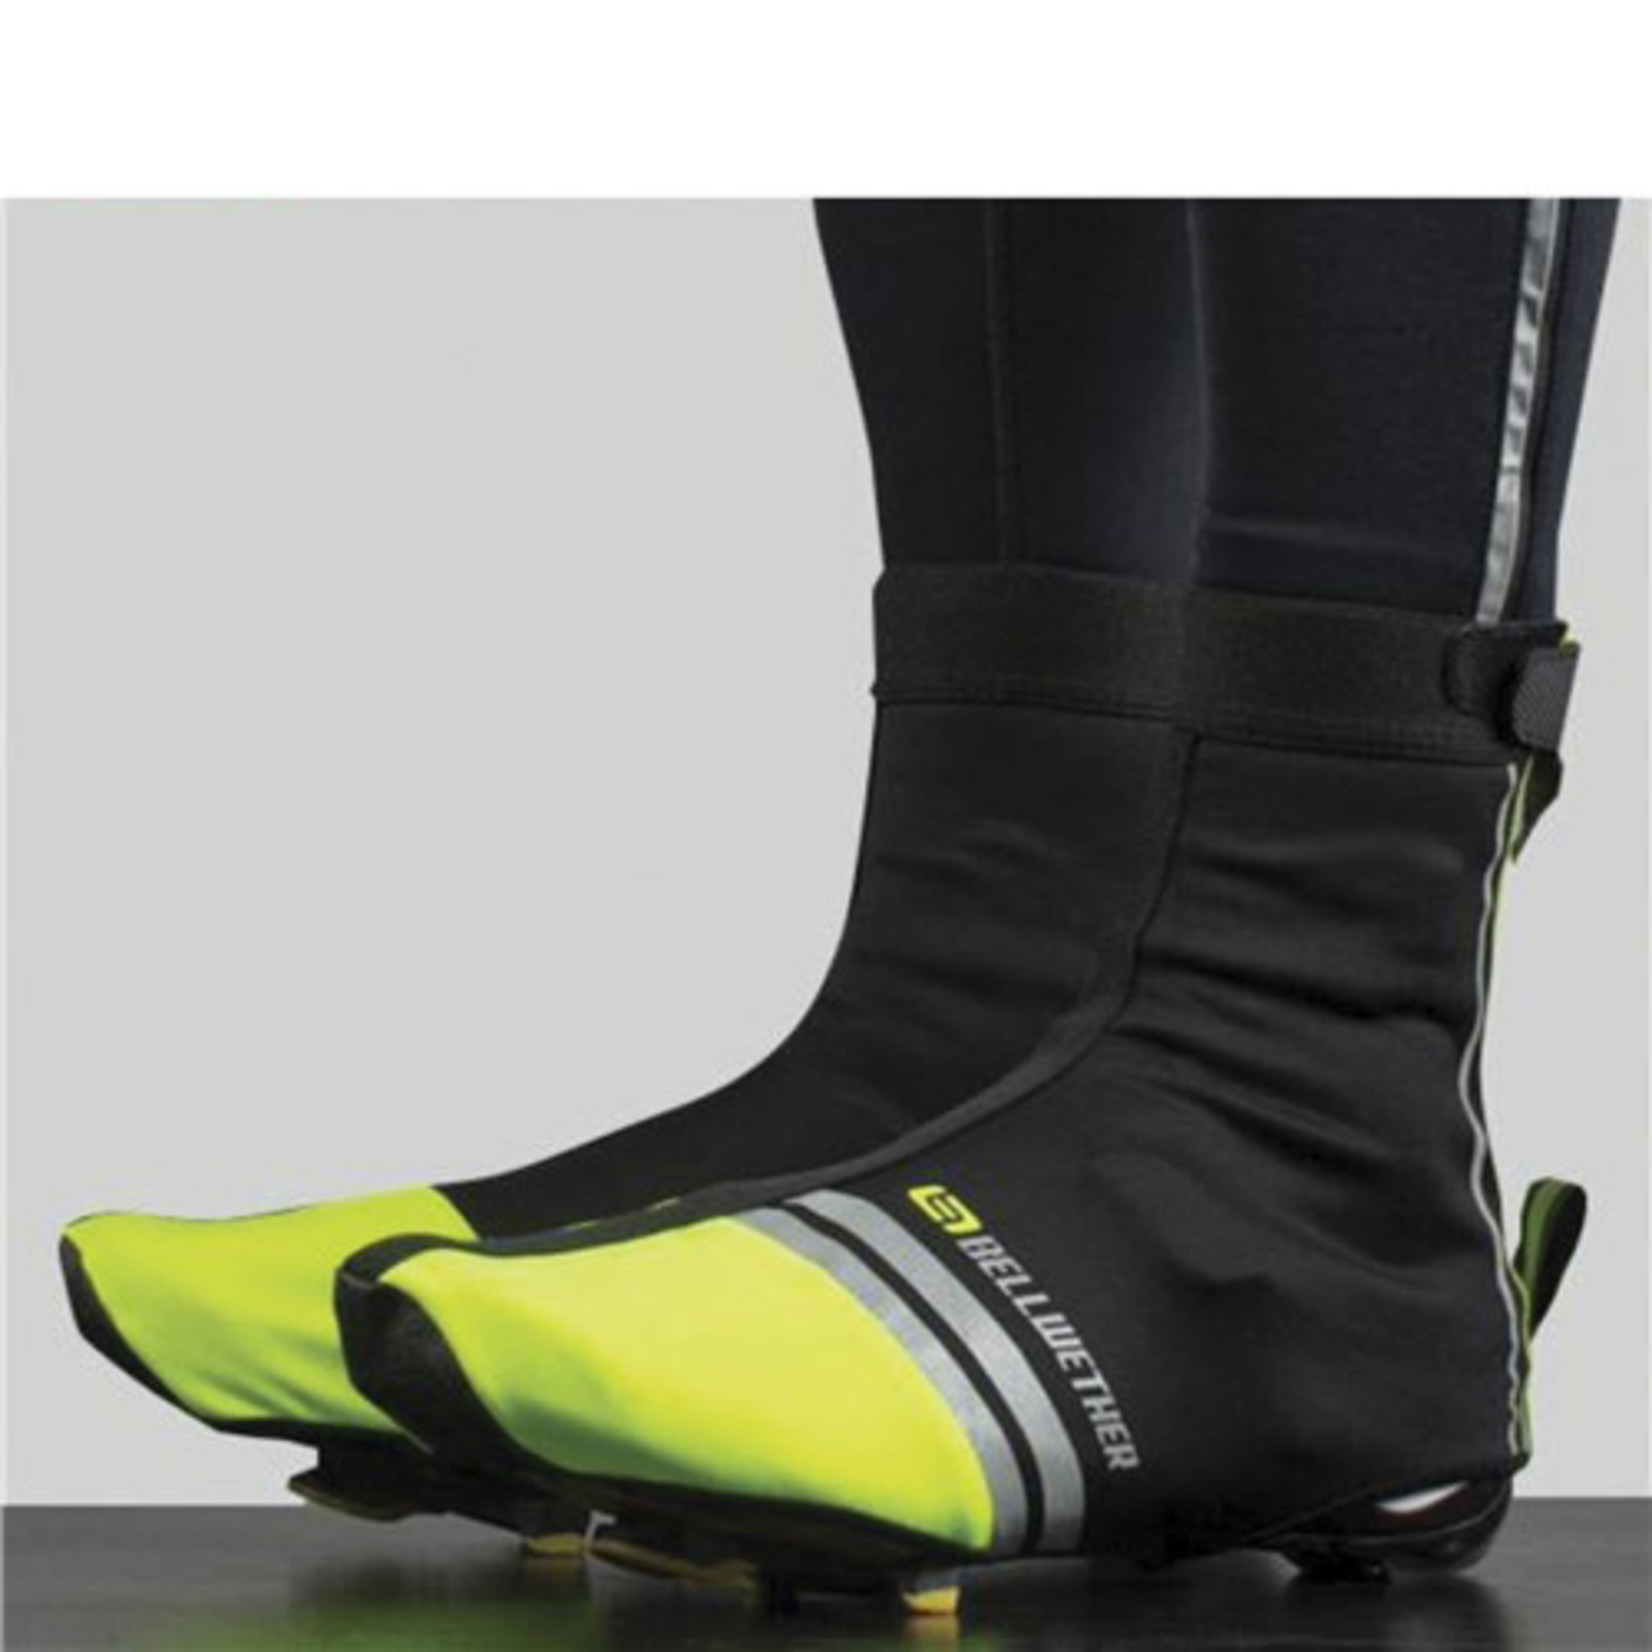 Bellwether Bellwether Coldfront Bootie Shoe Cover - Hi-Vis Windproof, Water Resistant